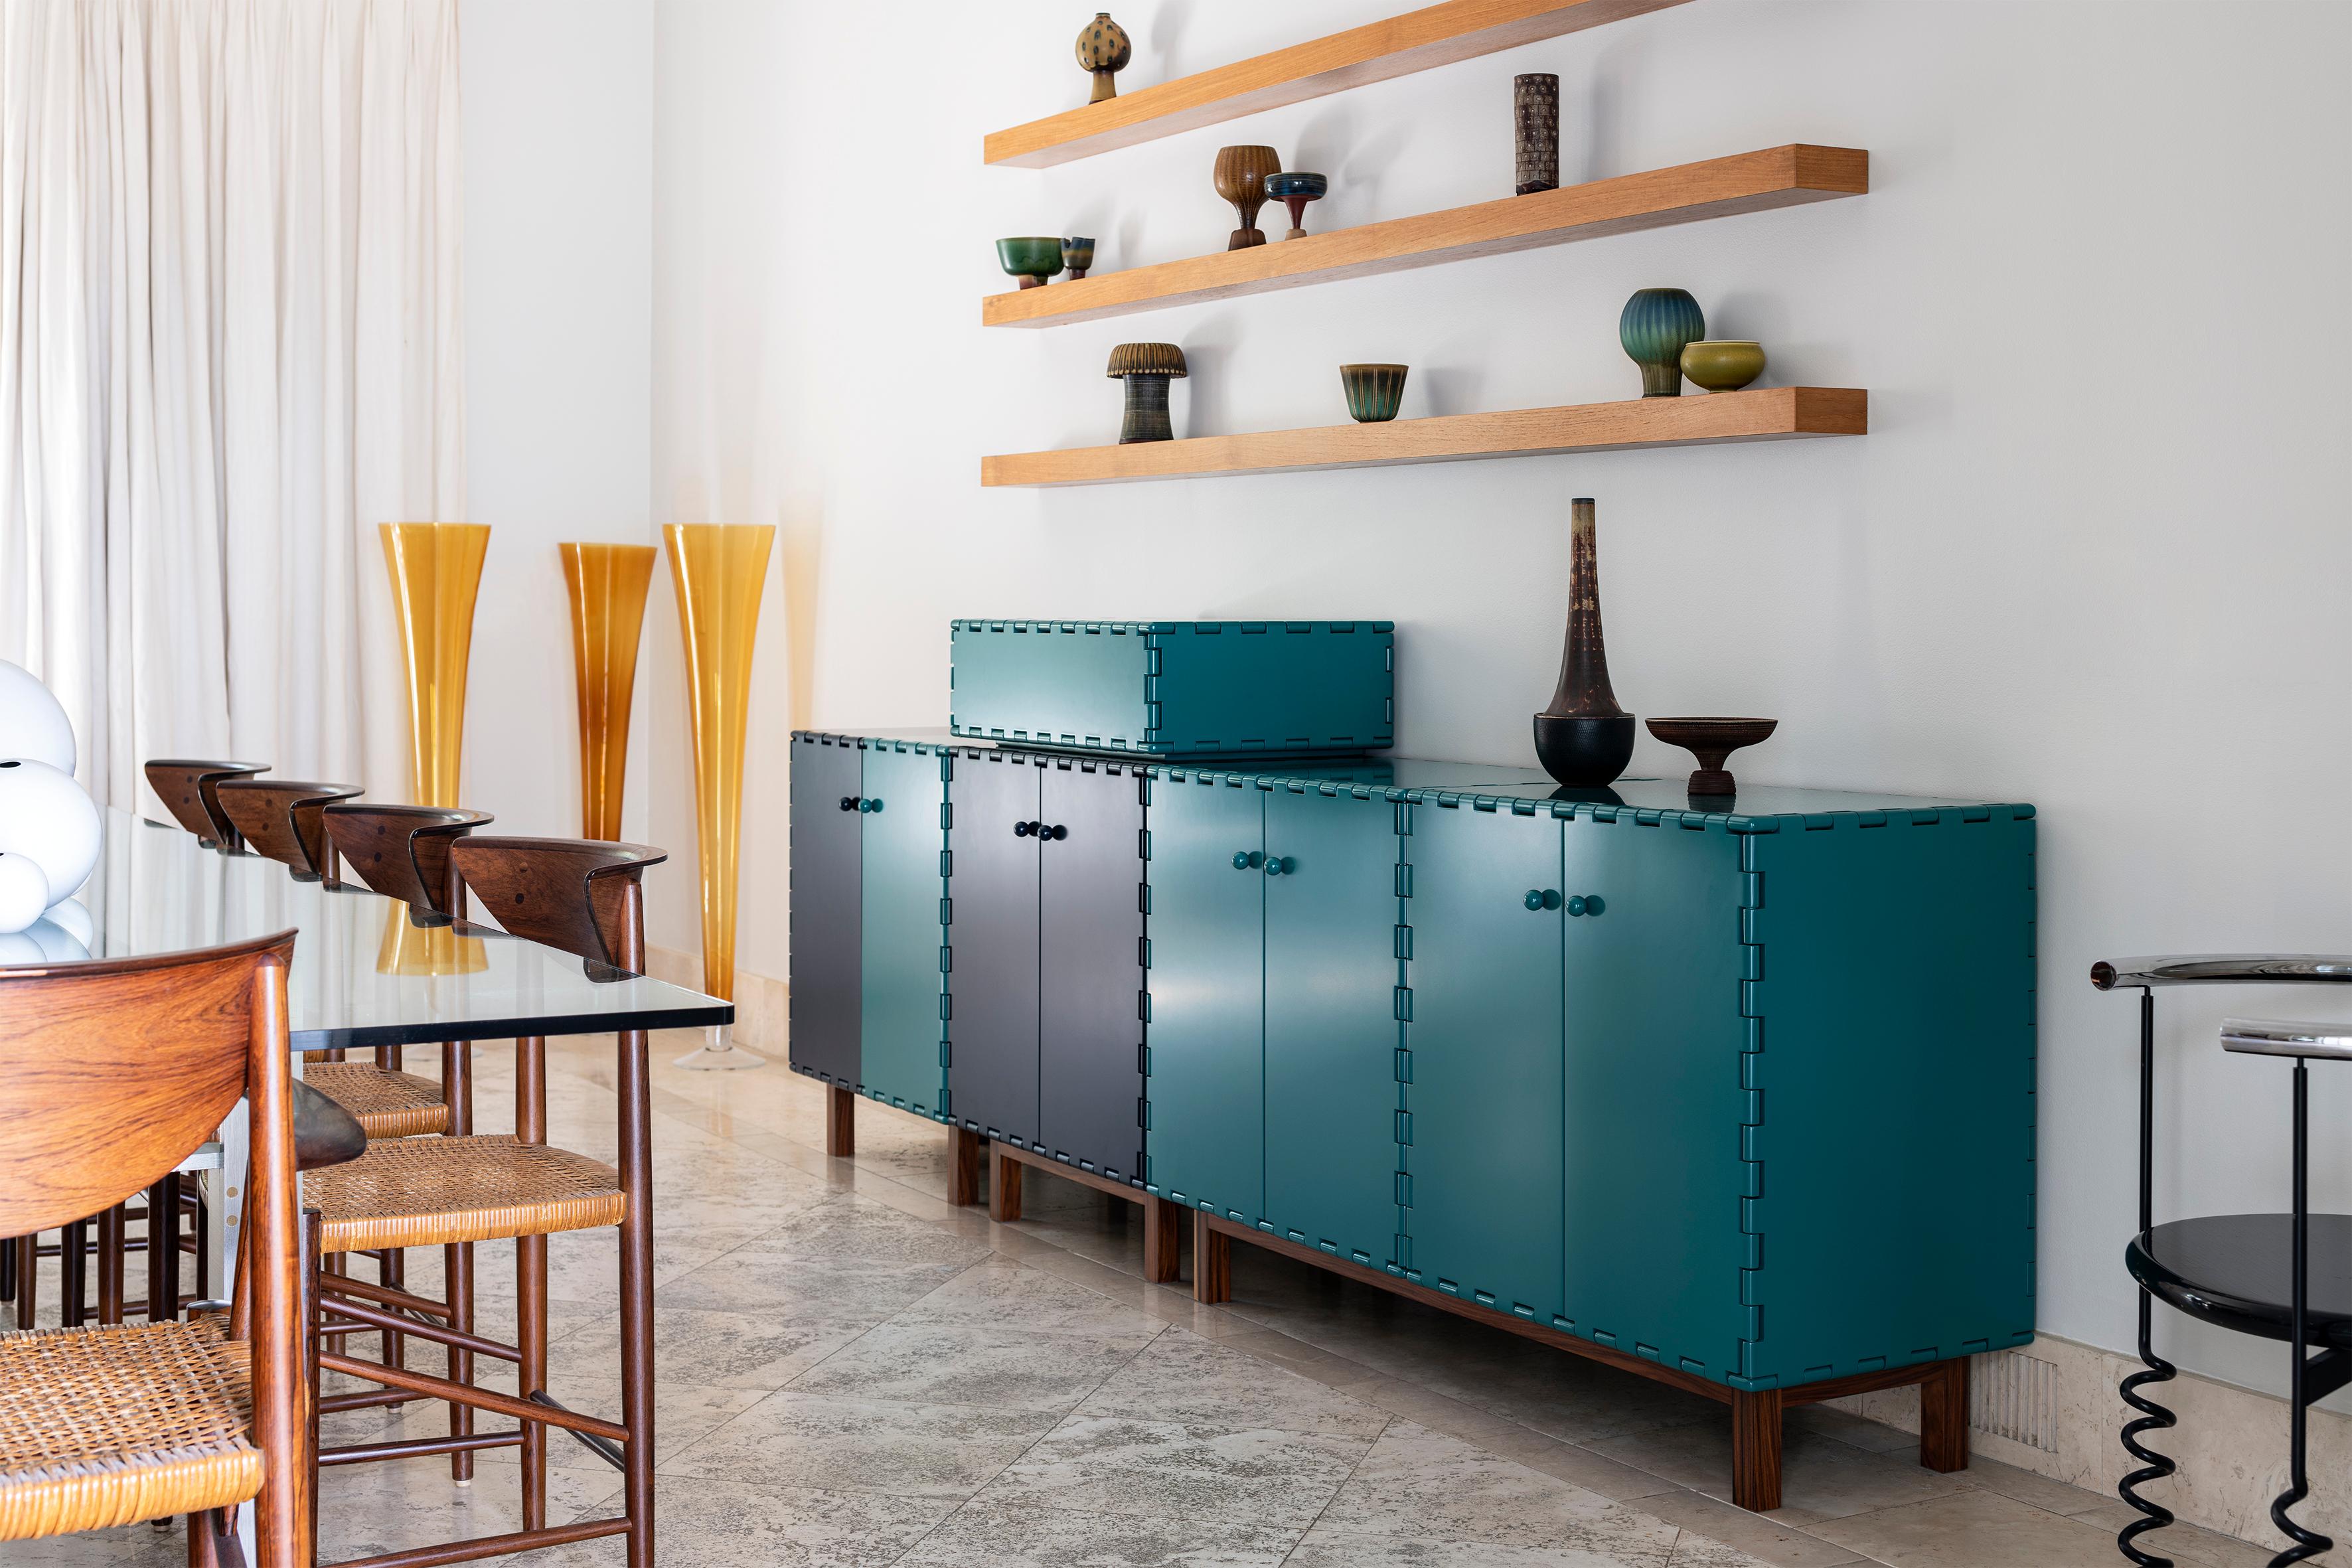 Handcrafted 4 pieces sideboard cabinet in lacquered wood. The lacquer color highlights the simplicity of the design details. The modular quality of the collection allow each cabinet to be combine with other pieces within the collection to create